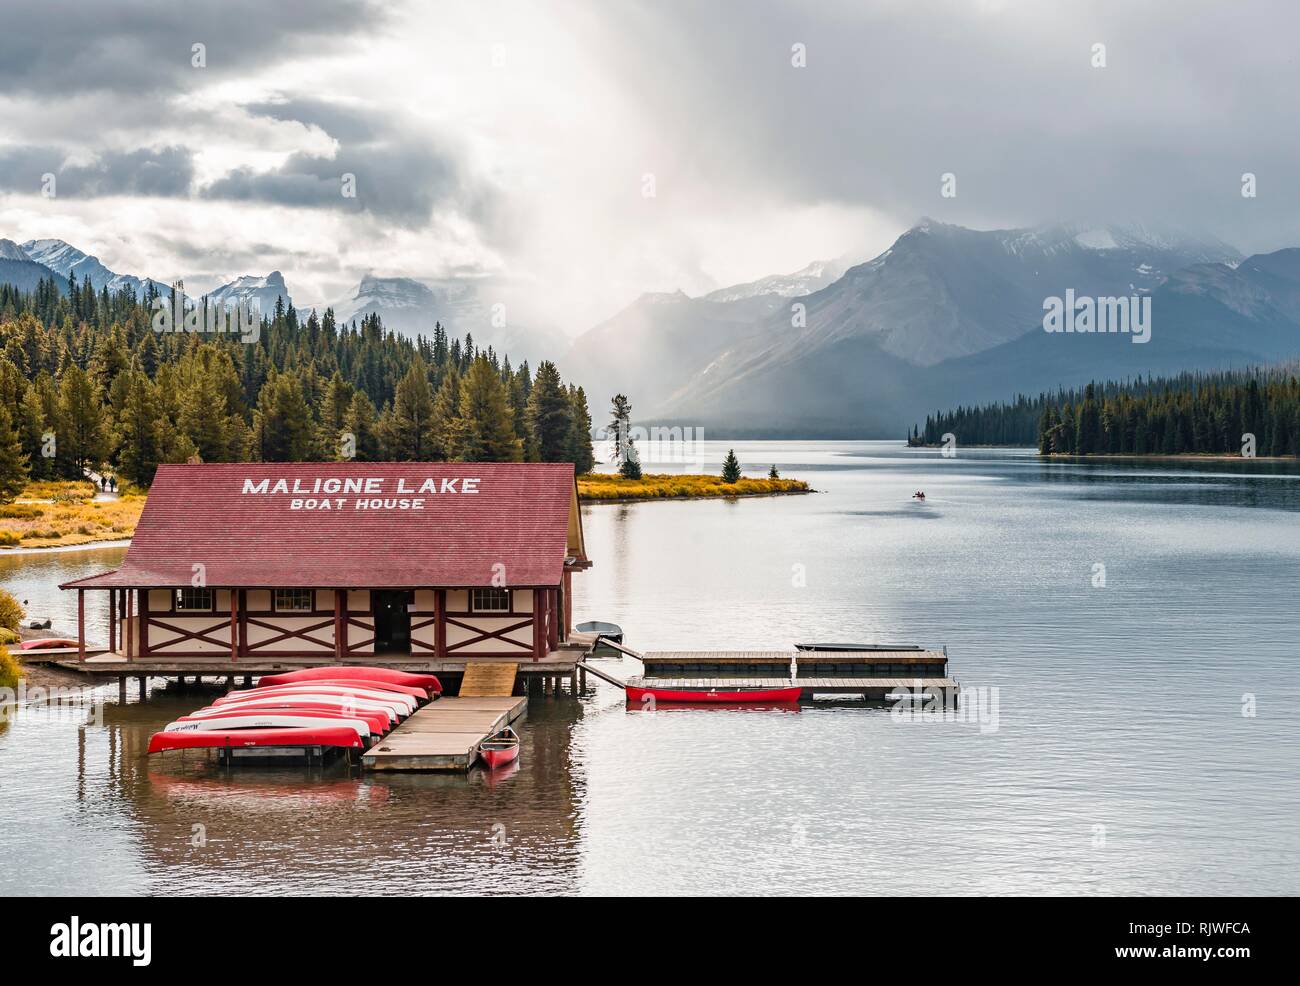 Curly Phillips Boathouse, historic boathouse on the lakeshore of Maligne Lake, Queen Elizabeth Ranges mountain chain behind Stock Photo